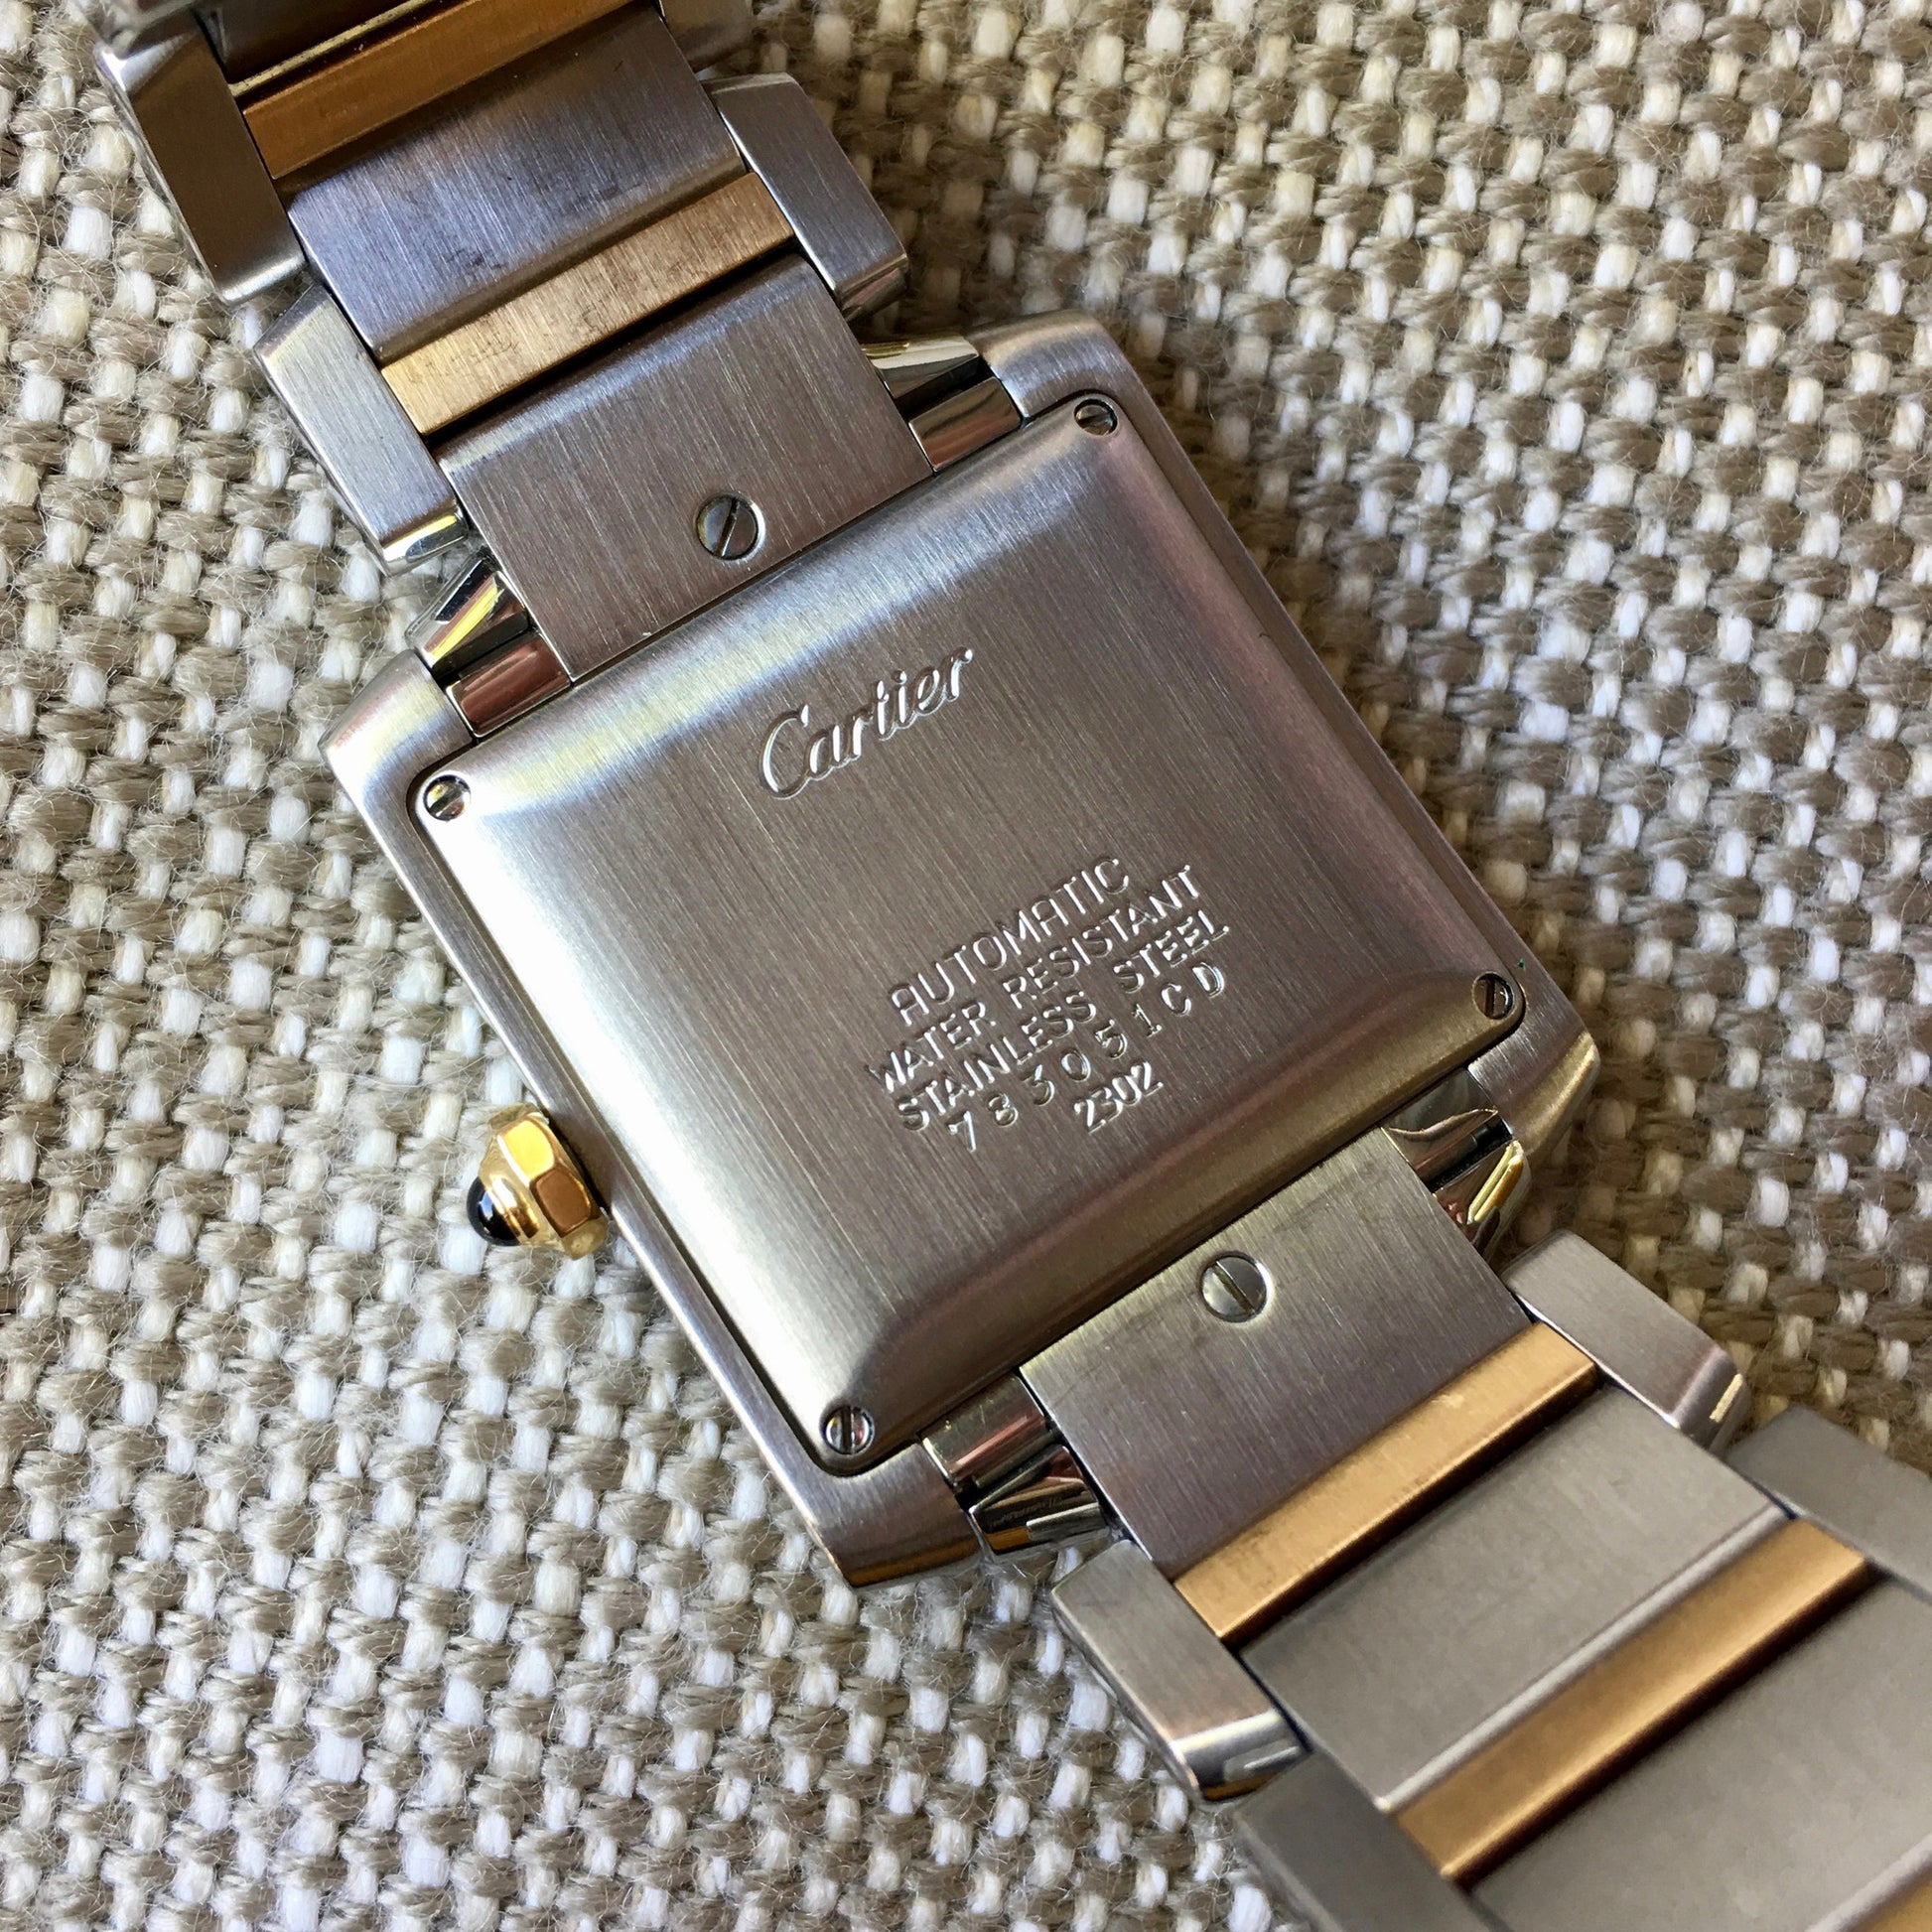 Cartier Tank Francaise 2302 Two Tone Steel 18k Gold 28mm Wristwatch - Hashtag Watch Company